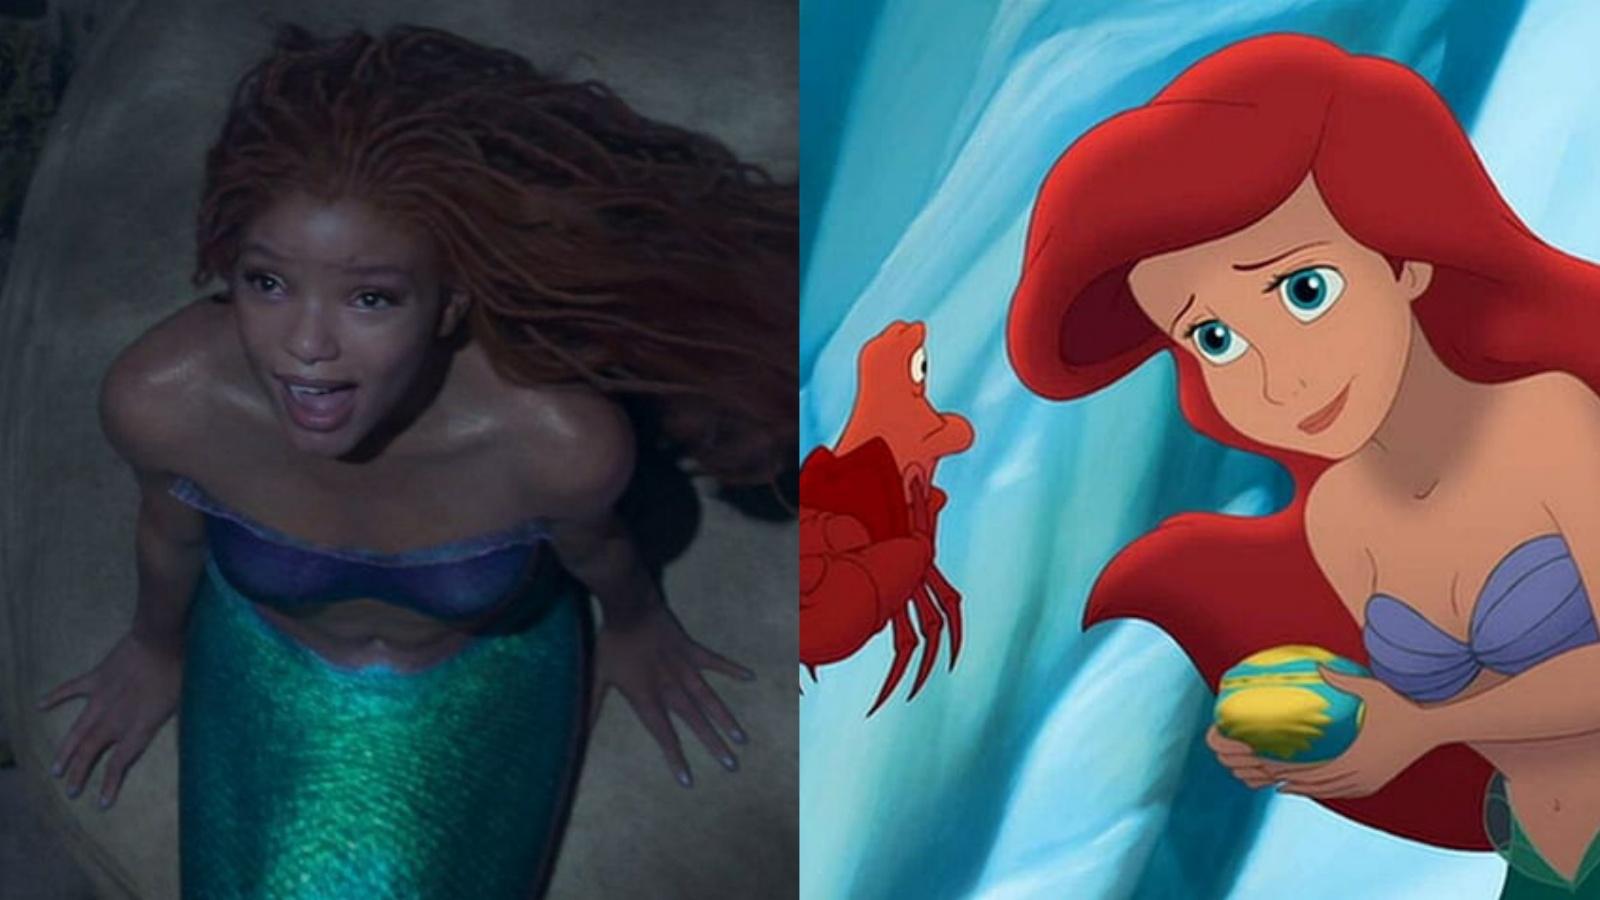 The Little mermaid 3 and live-action ariel